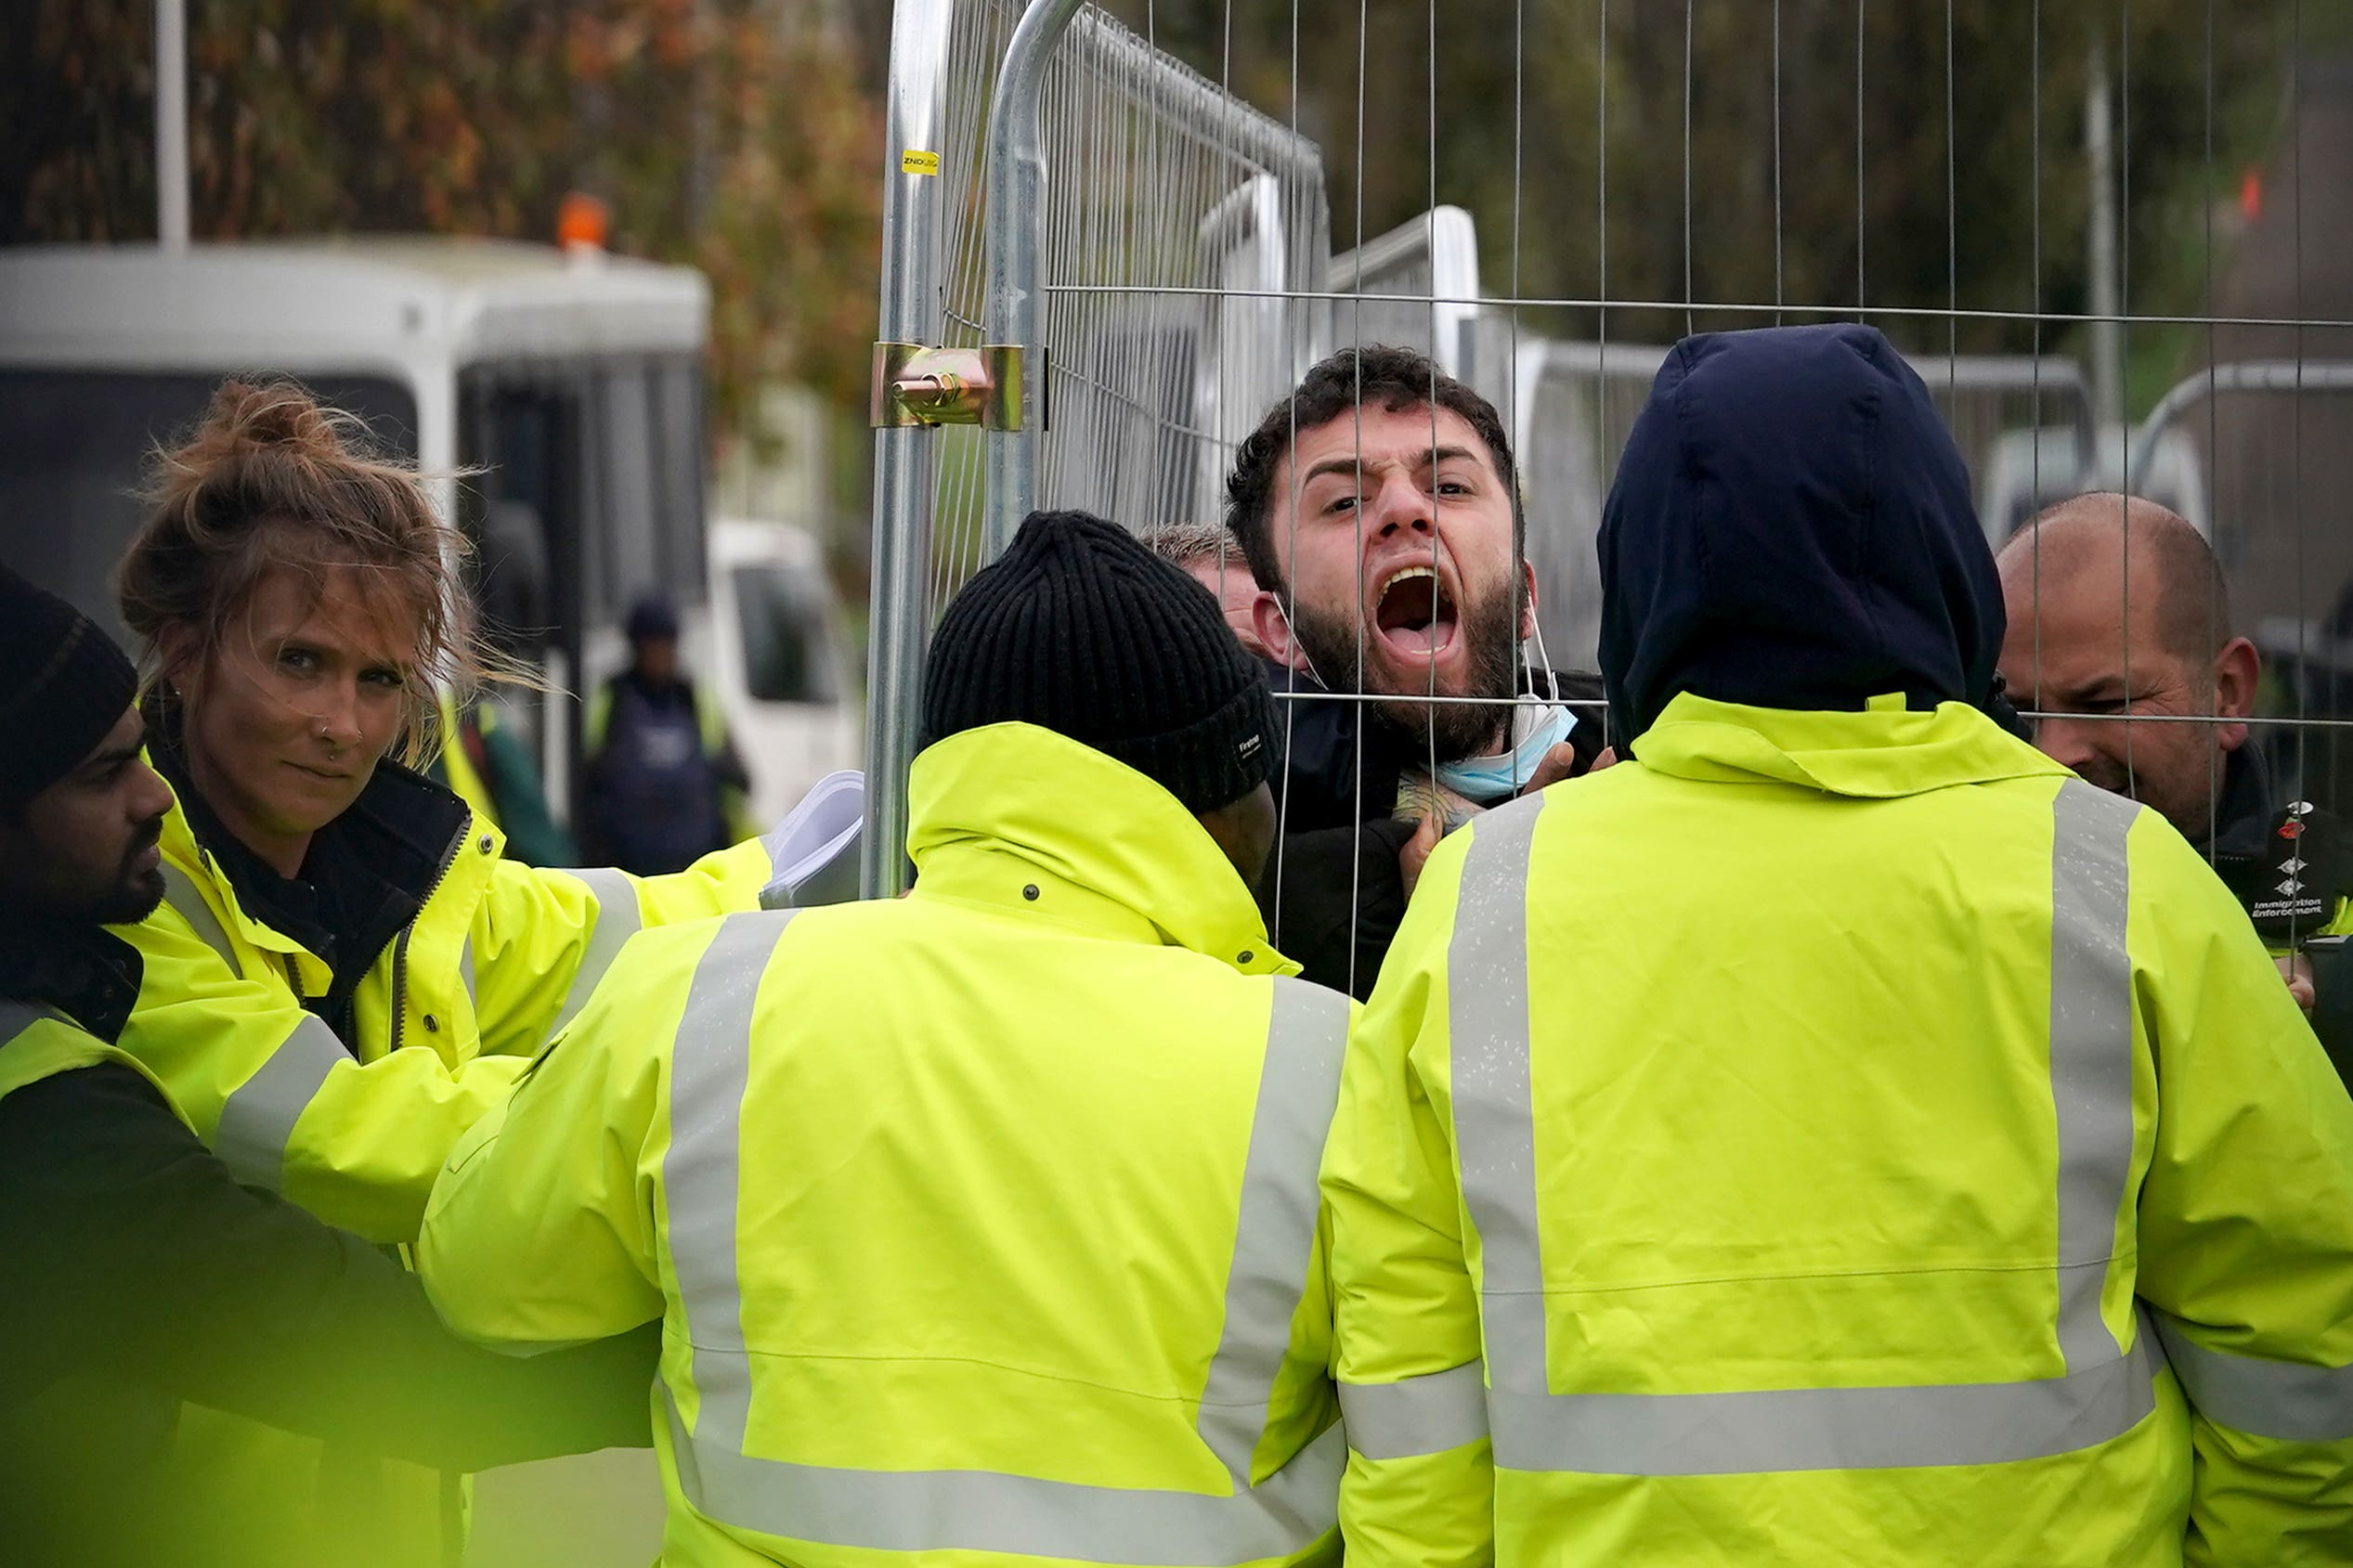 A migrant attempting to communicate with journalists is pinned against a fence by members of staff at the Manston immigration short-term holding facility in Kent (Gareth Fuller/PA)